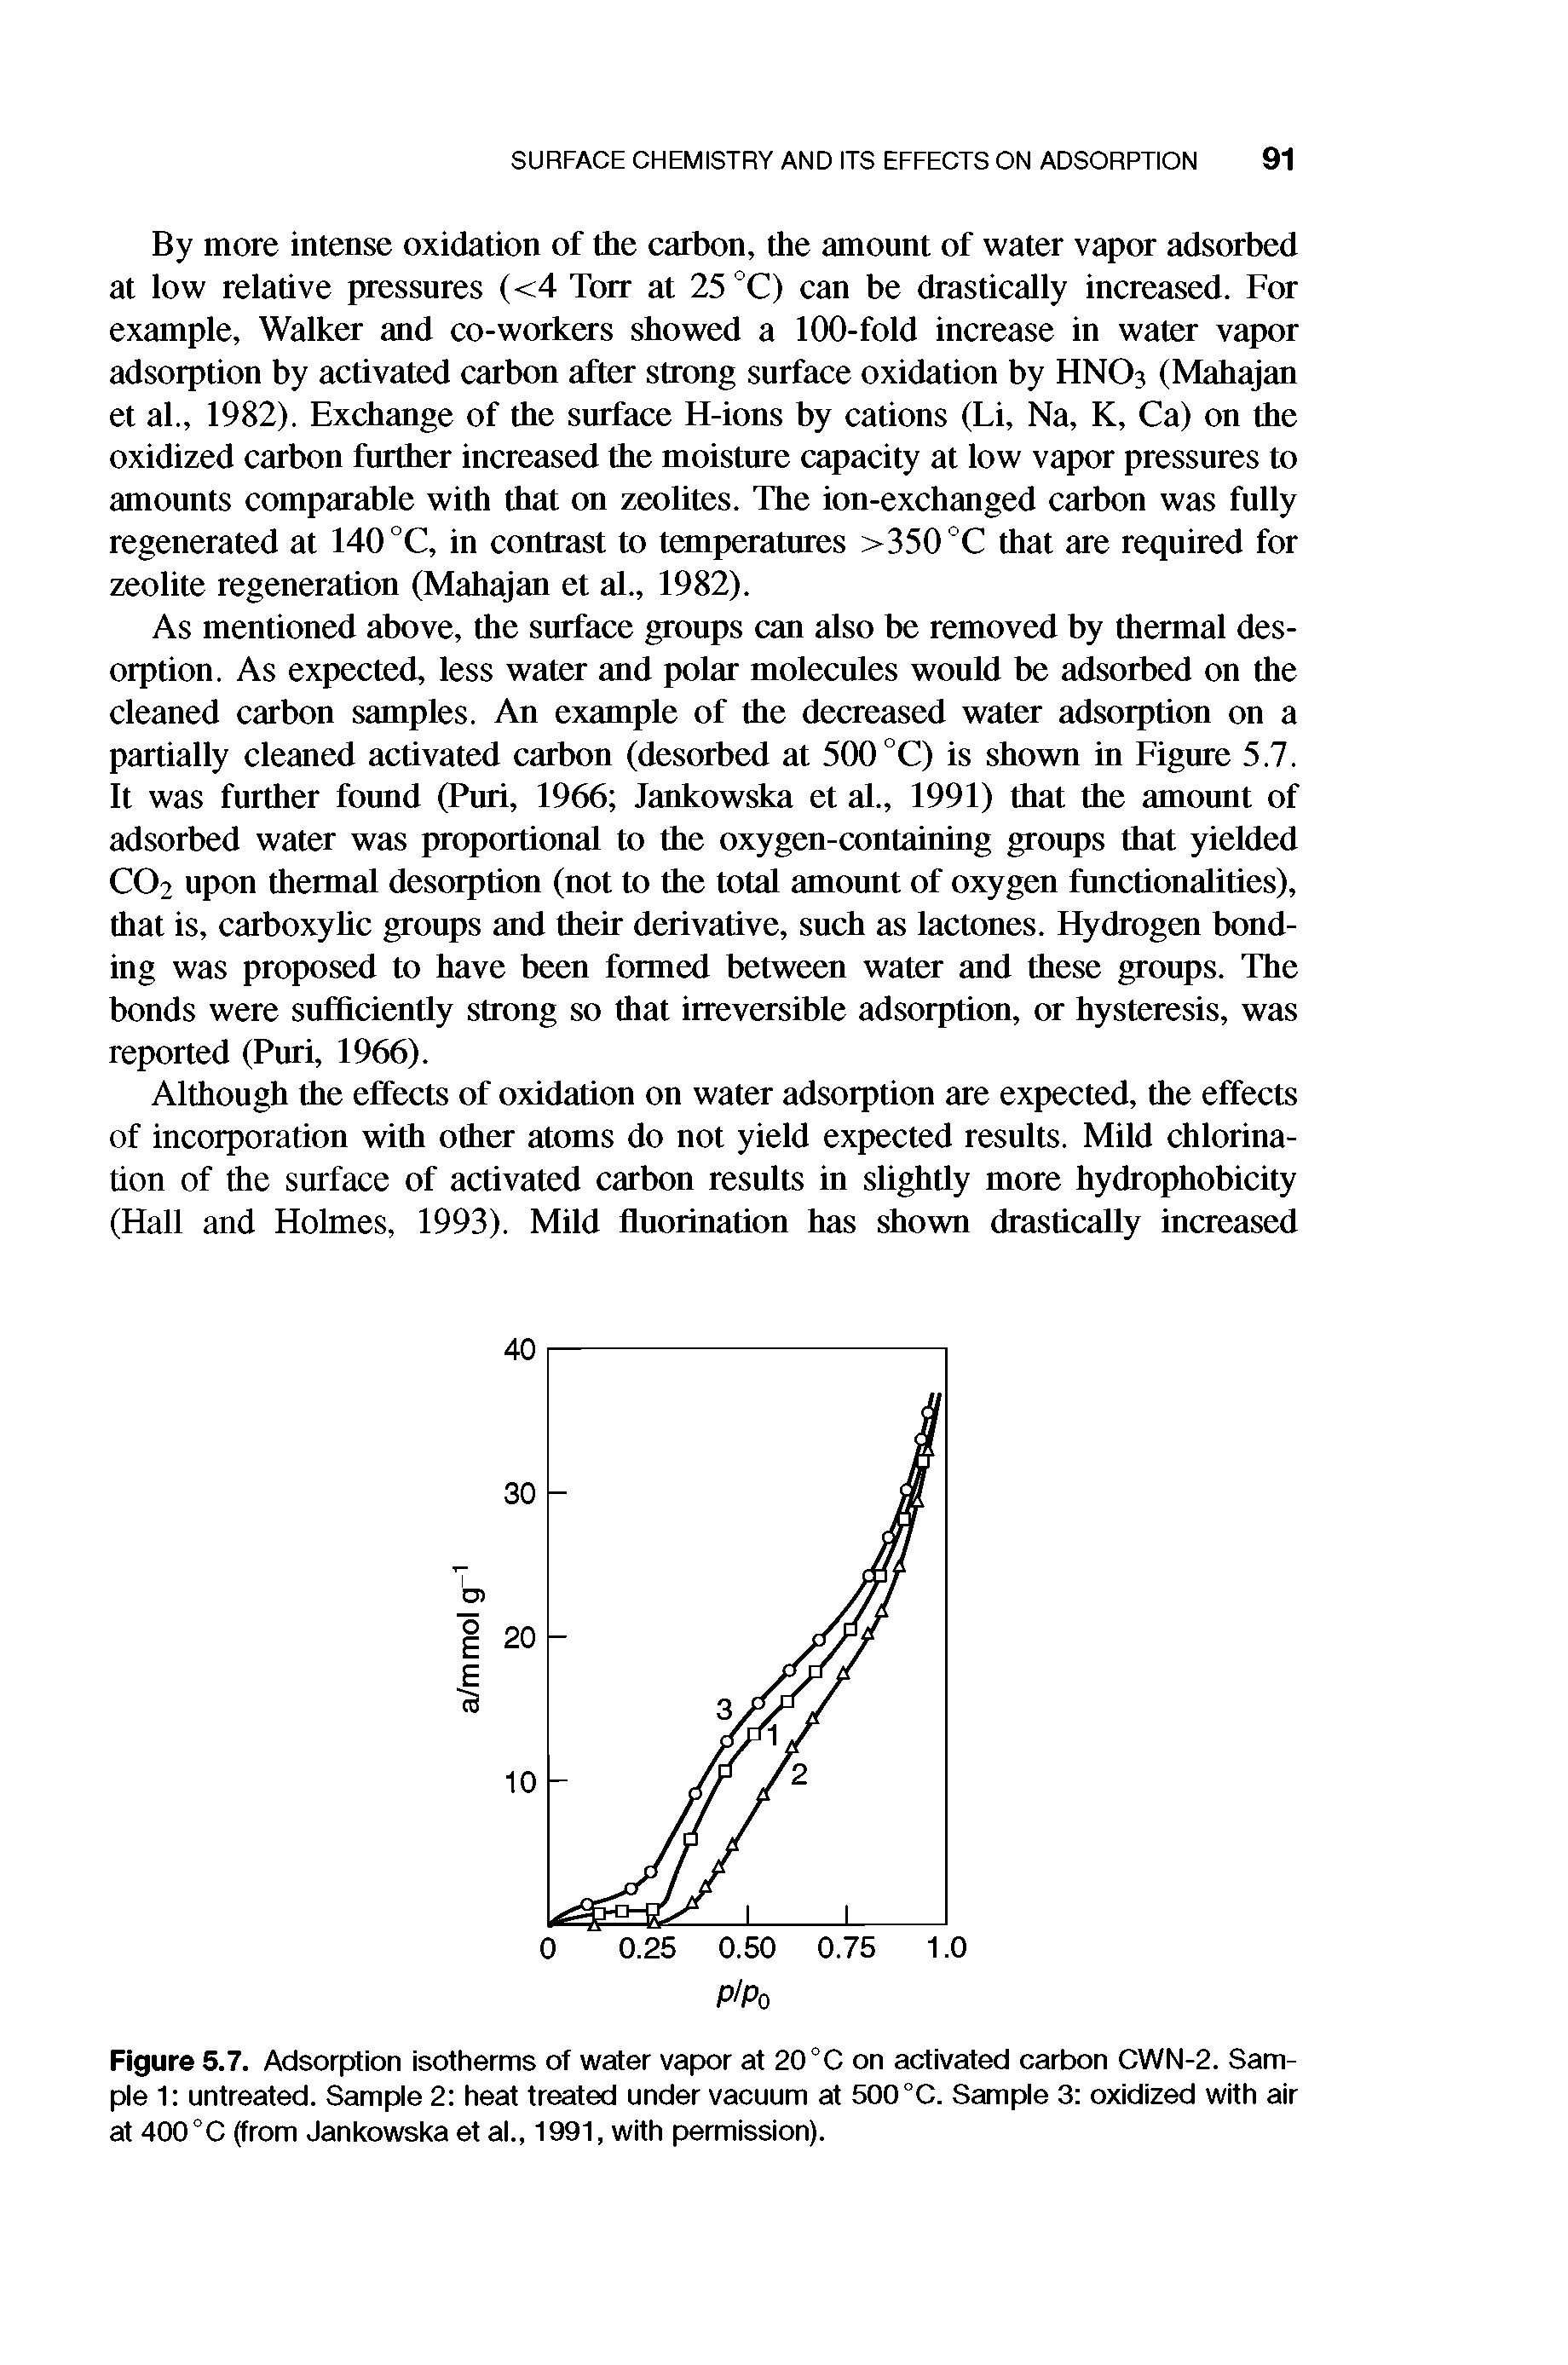 Figure 5.7. Adsorption isotherms of water vapor at 20°C on activated carbon CWN-2. Sam-pie 1 untreated. Sampie 2 heat treated under vacuum at 500°C. Sampie 3 oxidized with air at 400°C (from Jankowska et ai., 1991, with permission).